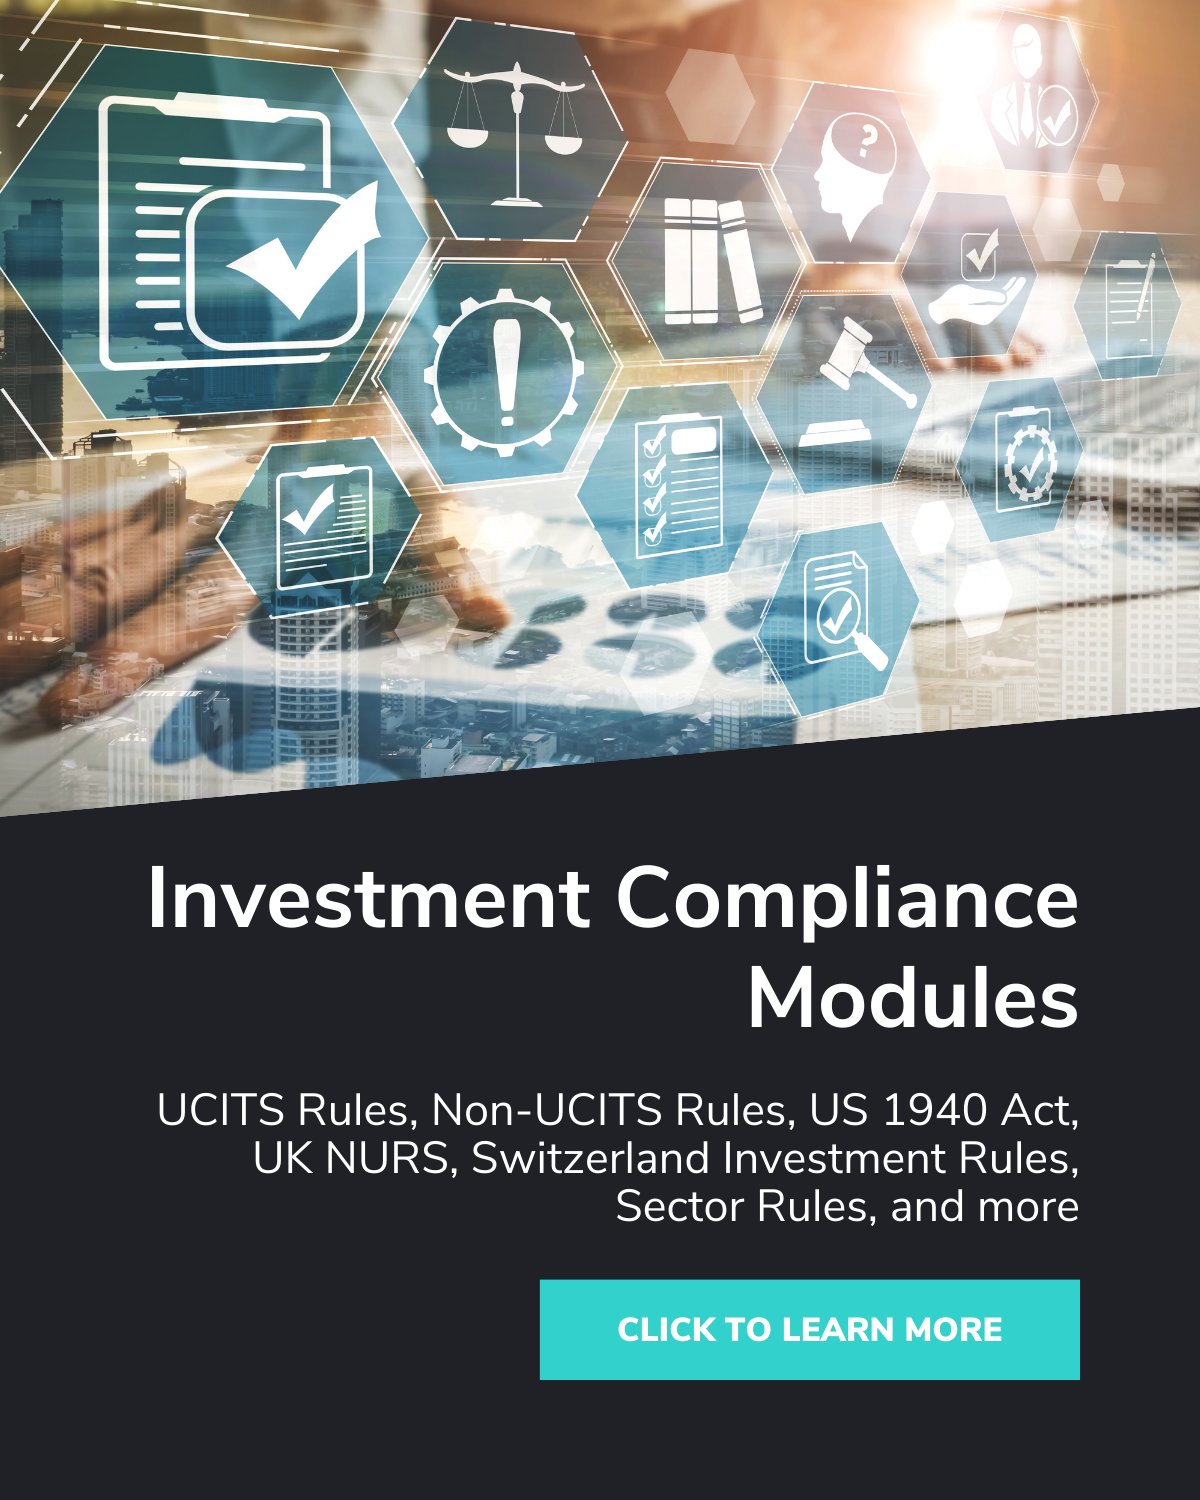 Investment Compliance Modules